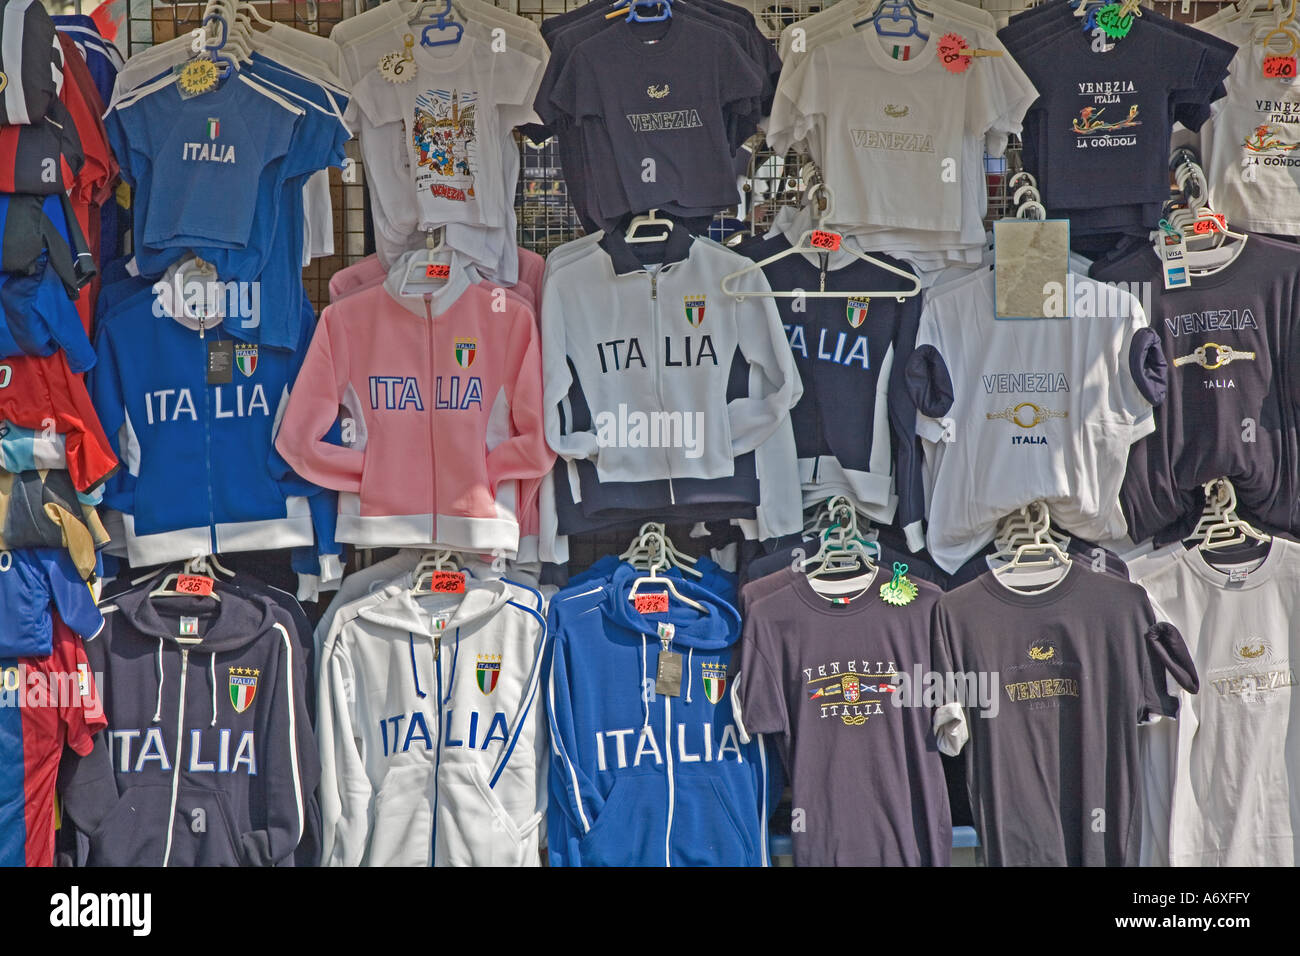 Italian Sportswear Clothing High Resolution Stock Photography and Images -  Alamy